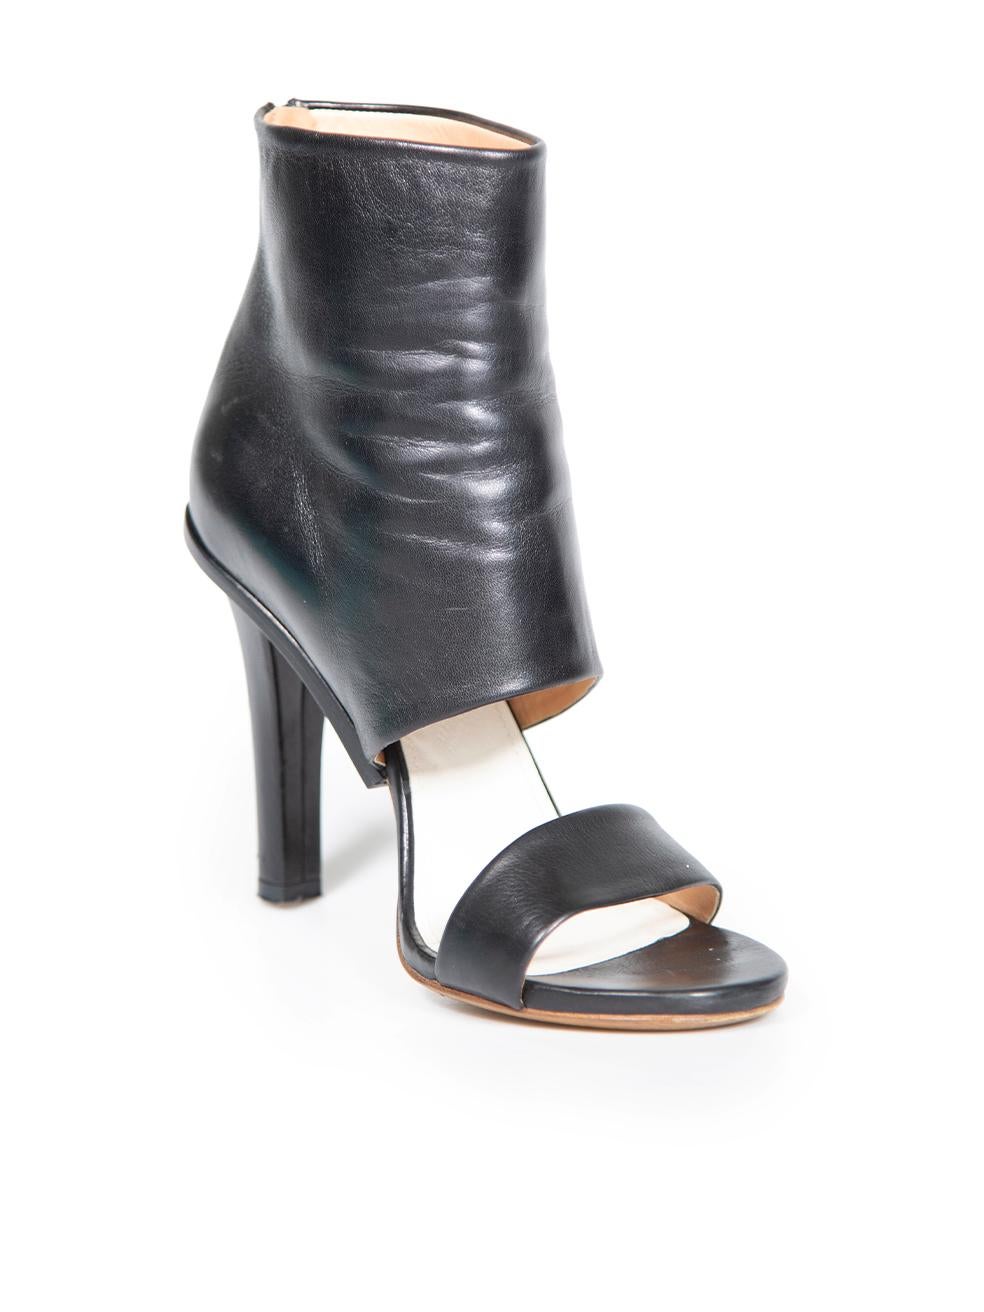 CONDITION is Good. Minor wear to heels is evident. Light wear to uppers with creasing seen around the ankles and a handful of scuff marks found at the heels. Noticeable abrasion through the outsoles on this used Maison Margiela designer resale